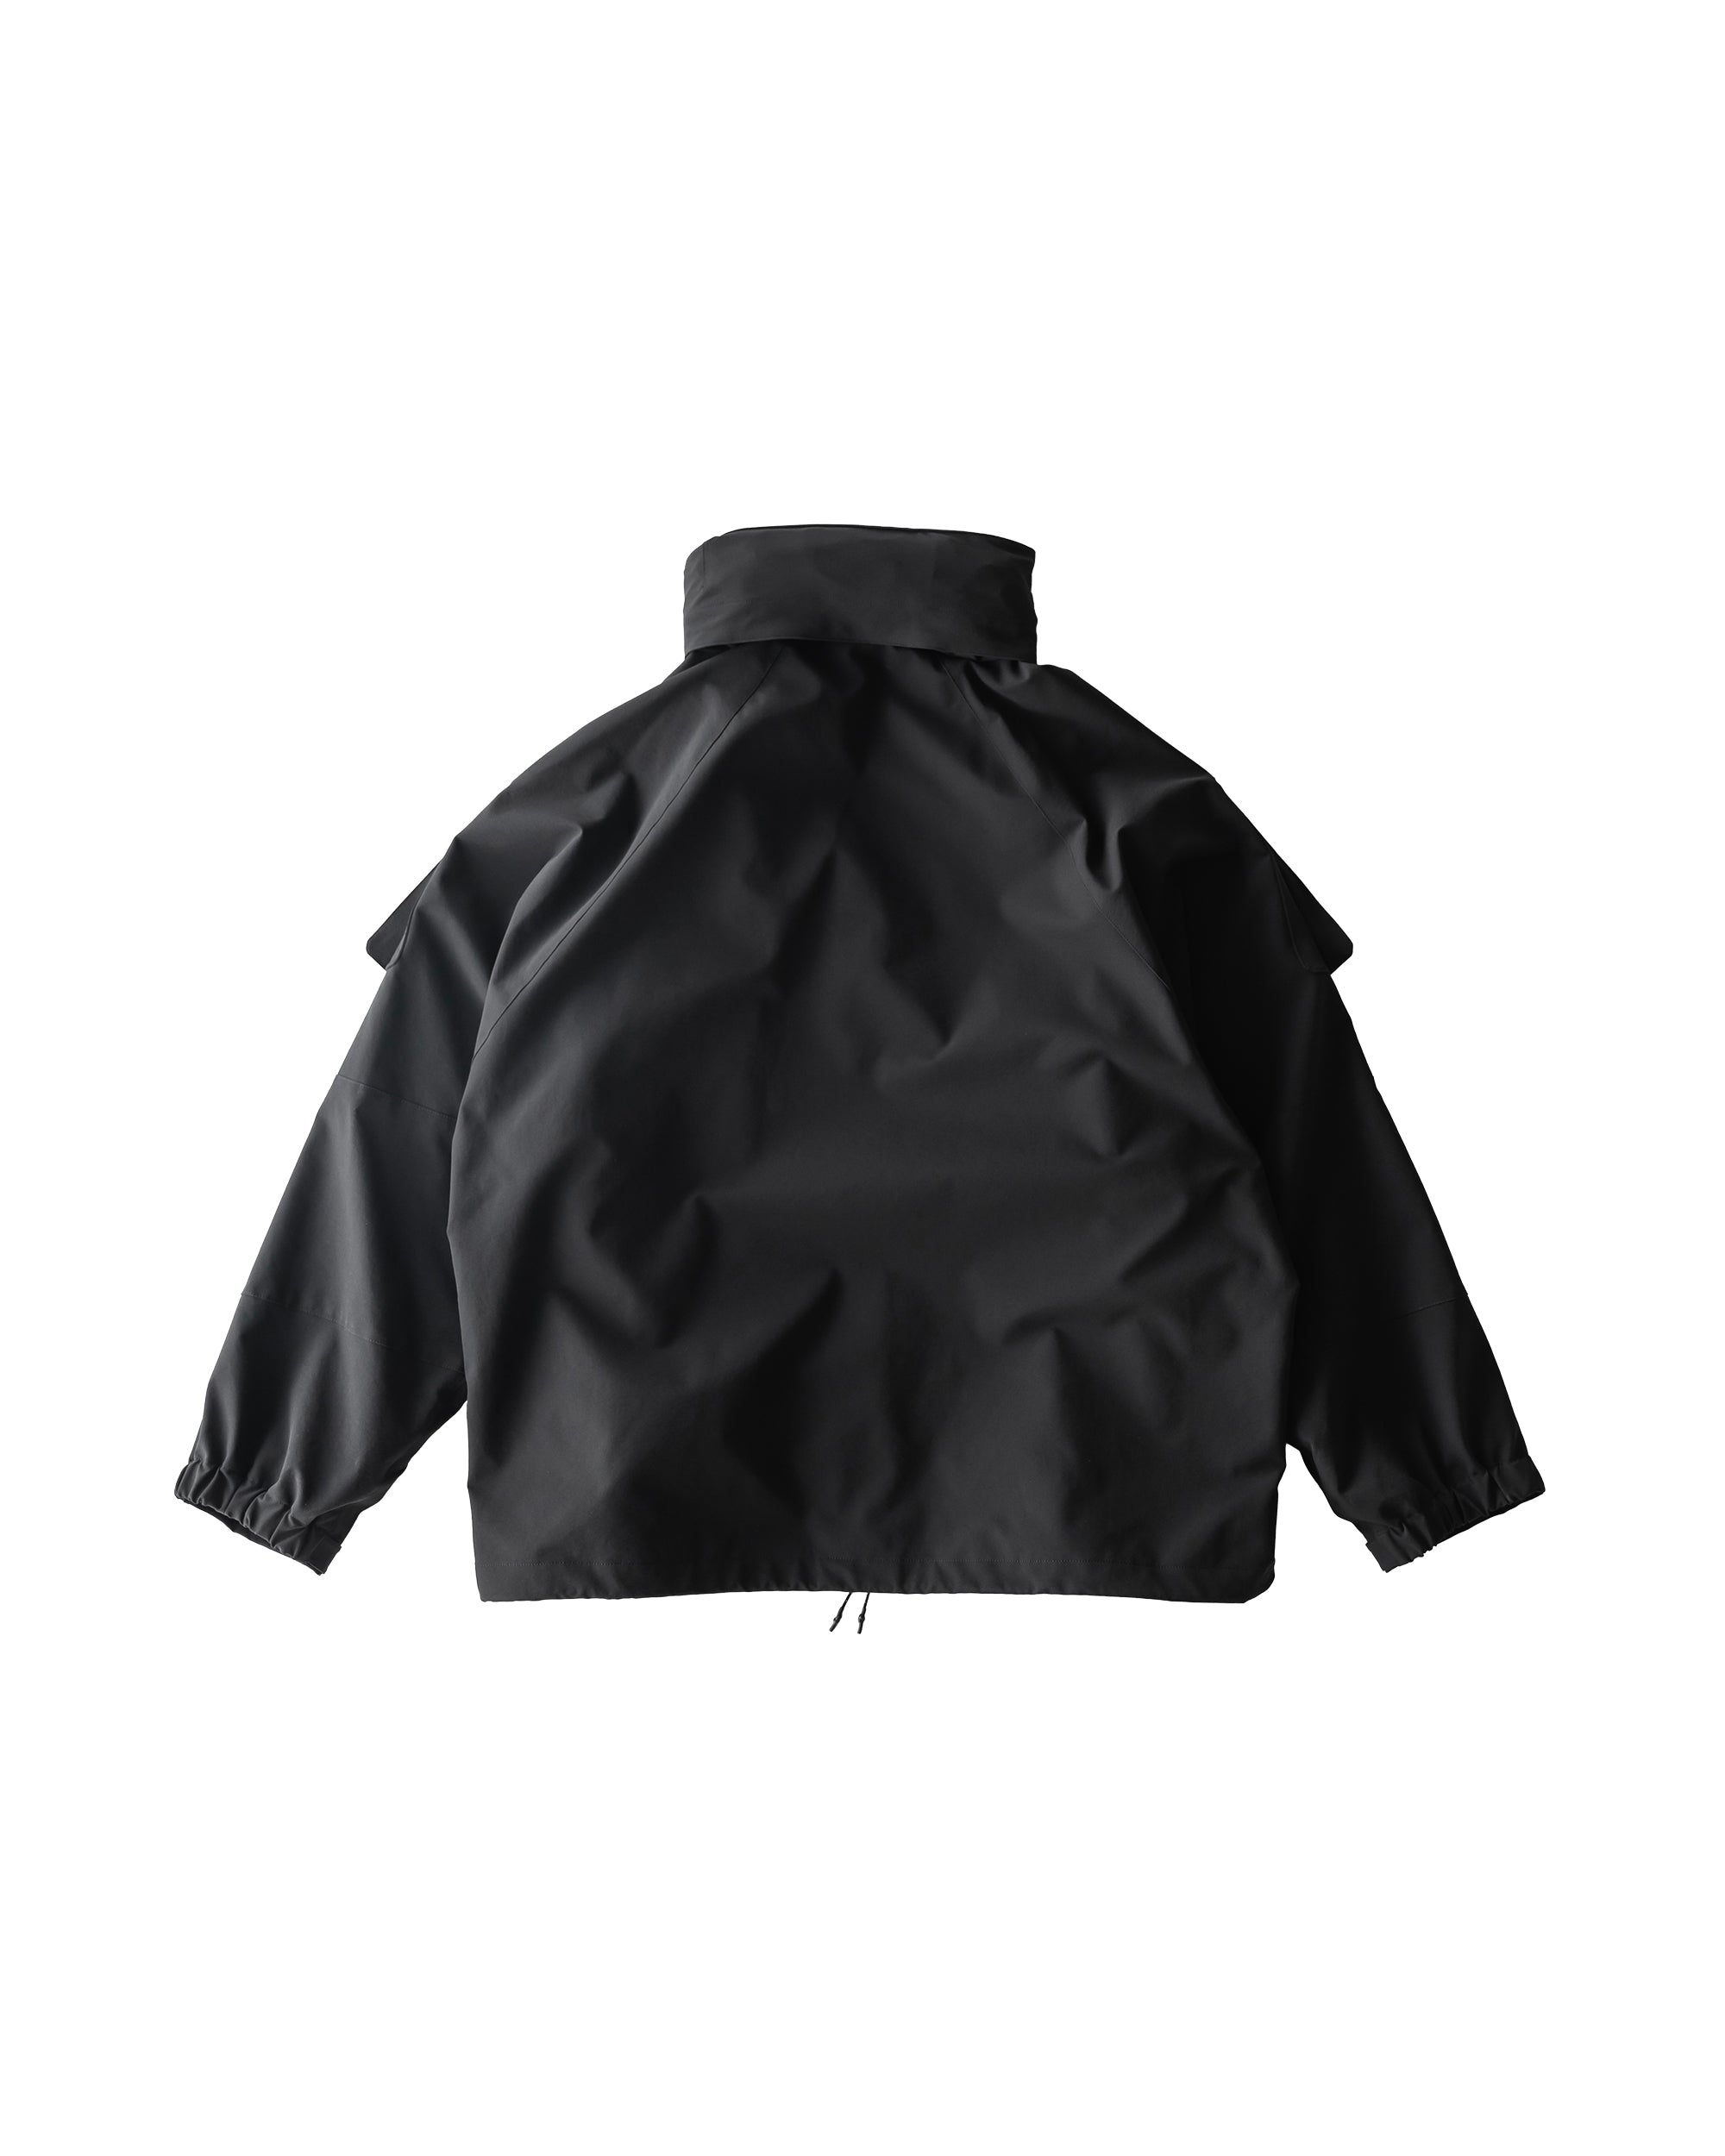 【2.10 sat 20:00- In stock】SOFTSHELL MILITARY JACKET